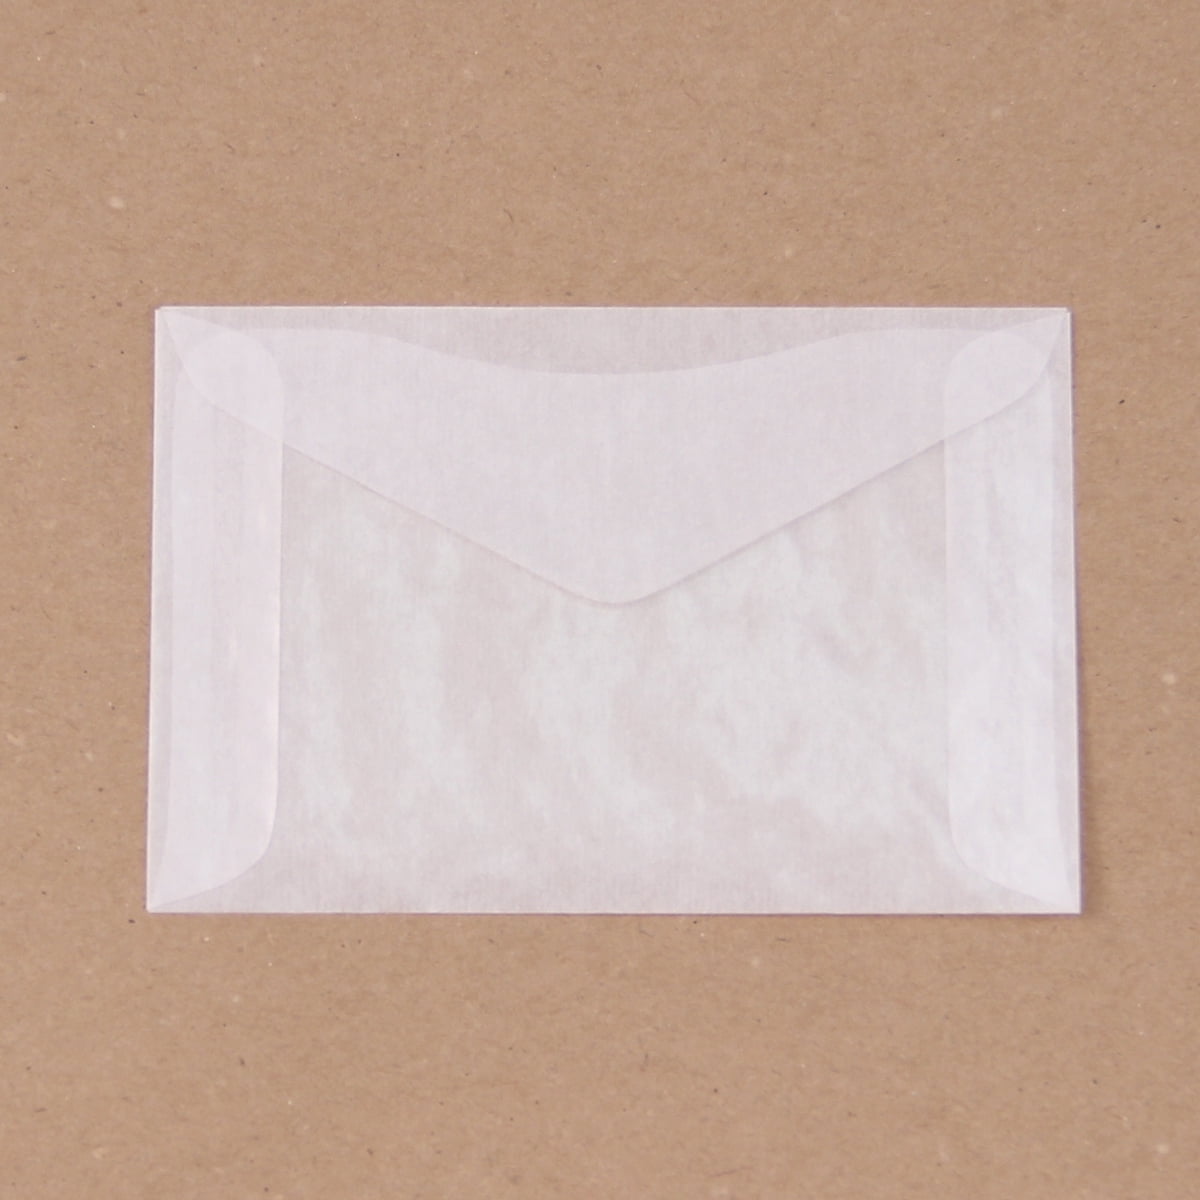 100 Glassine Top Opening Envelopes 2 1/2 x 4 1/4 Inches (No.3 Size)